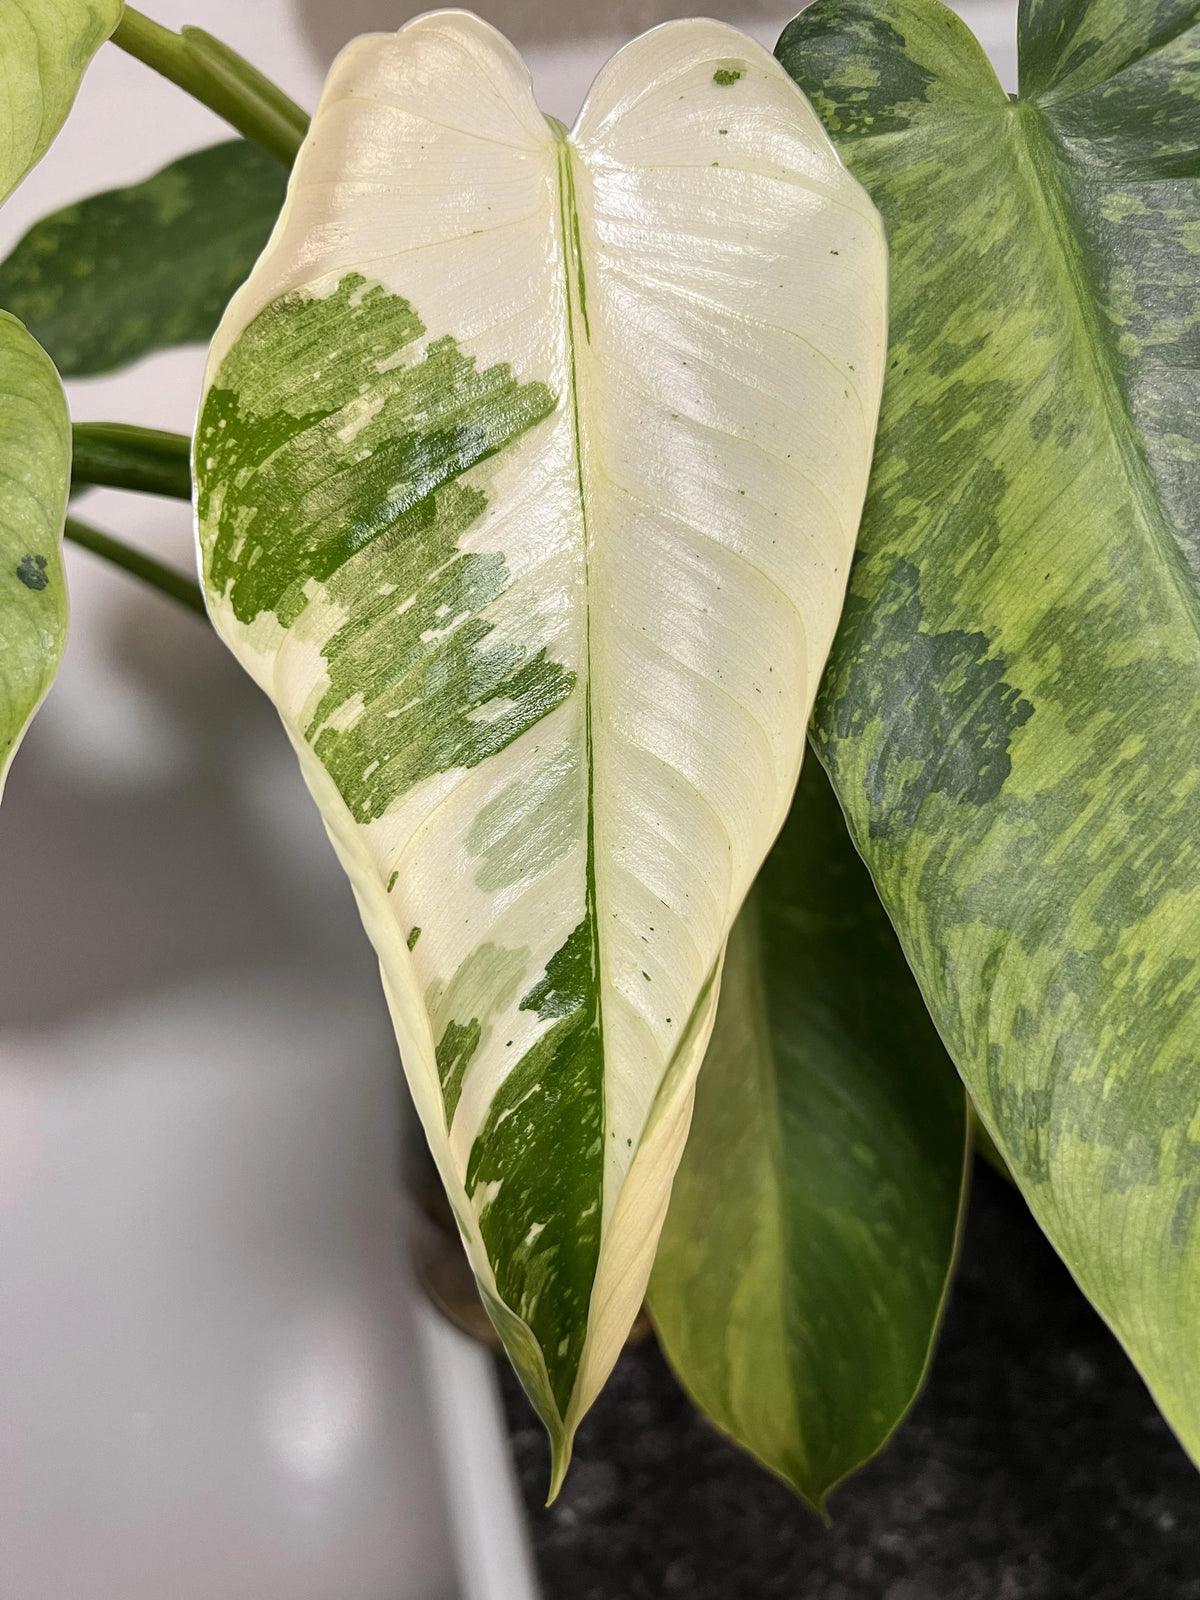 Philodendron 'Jose Bueno' - 'Variegated' (High Variegation)